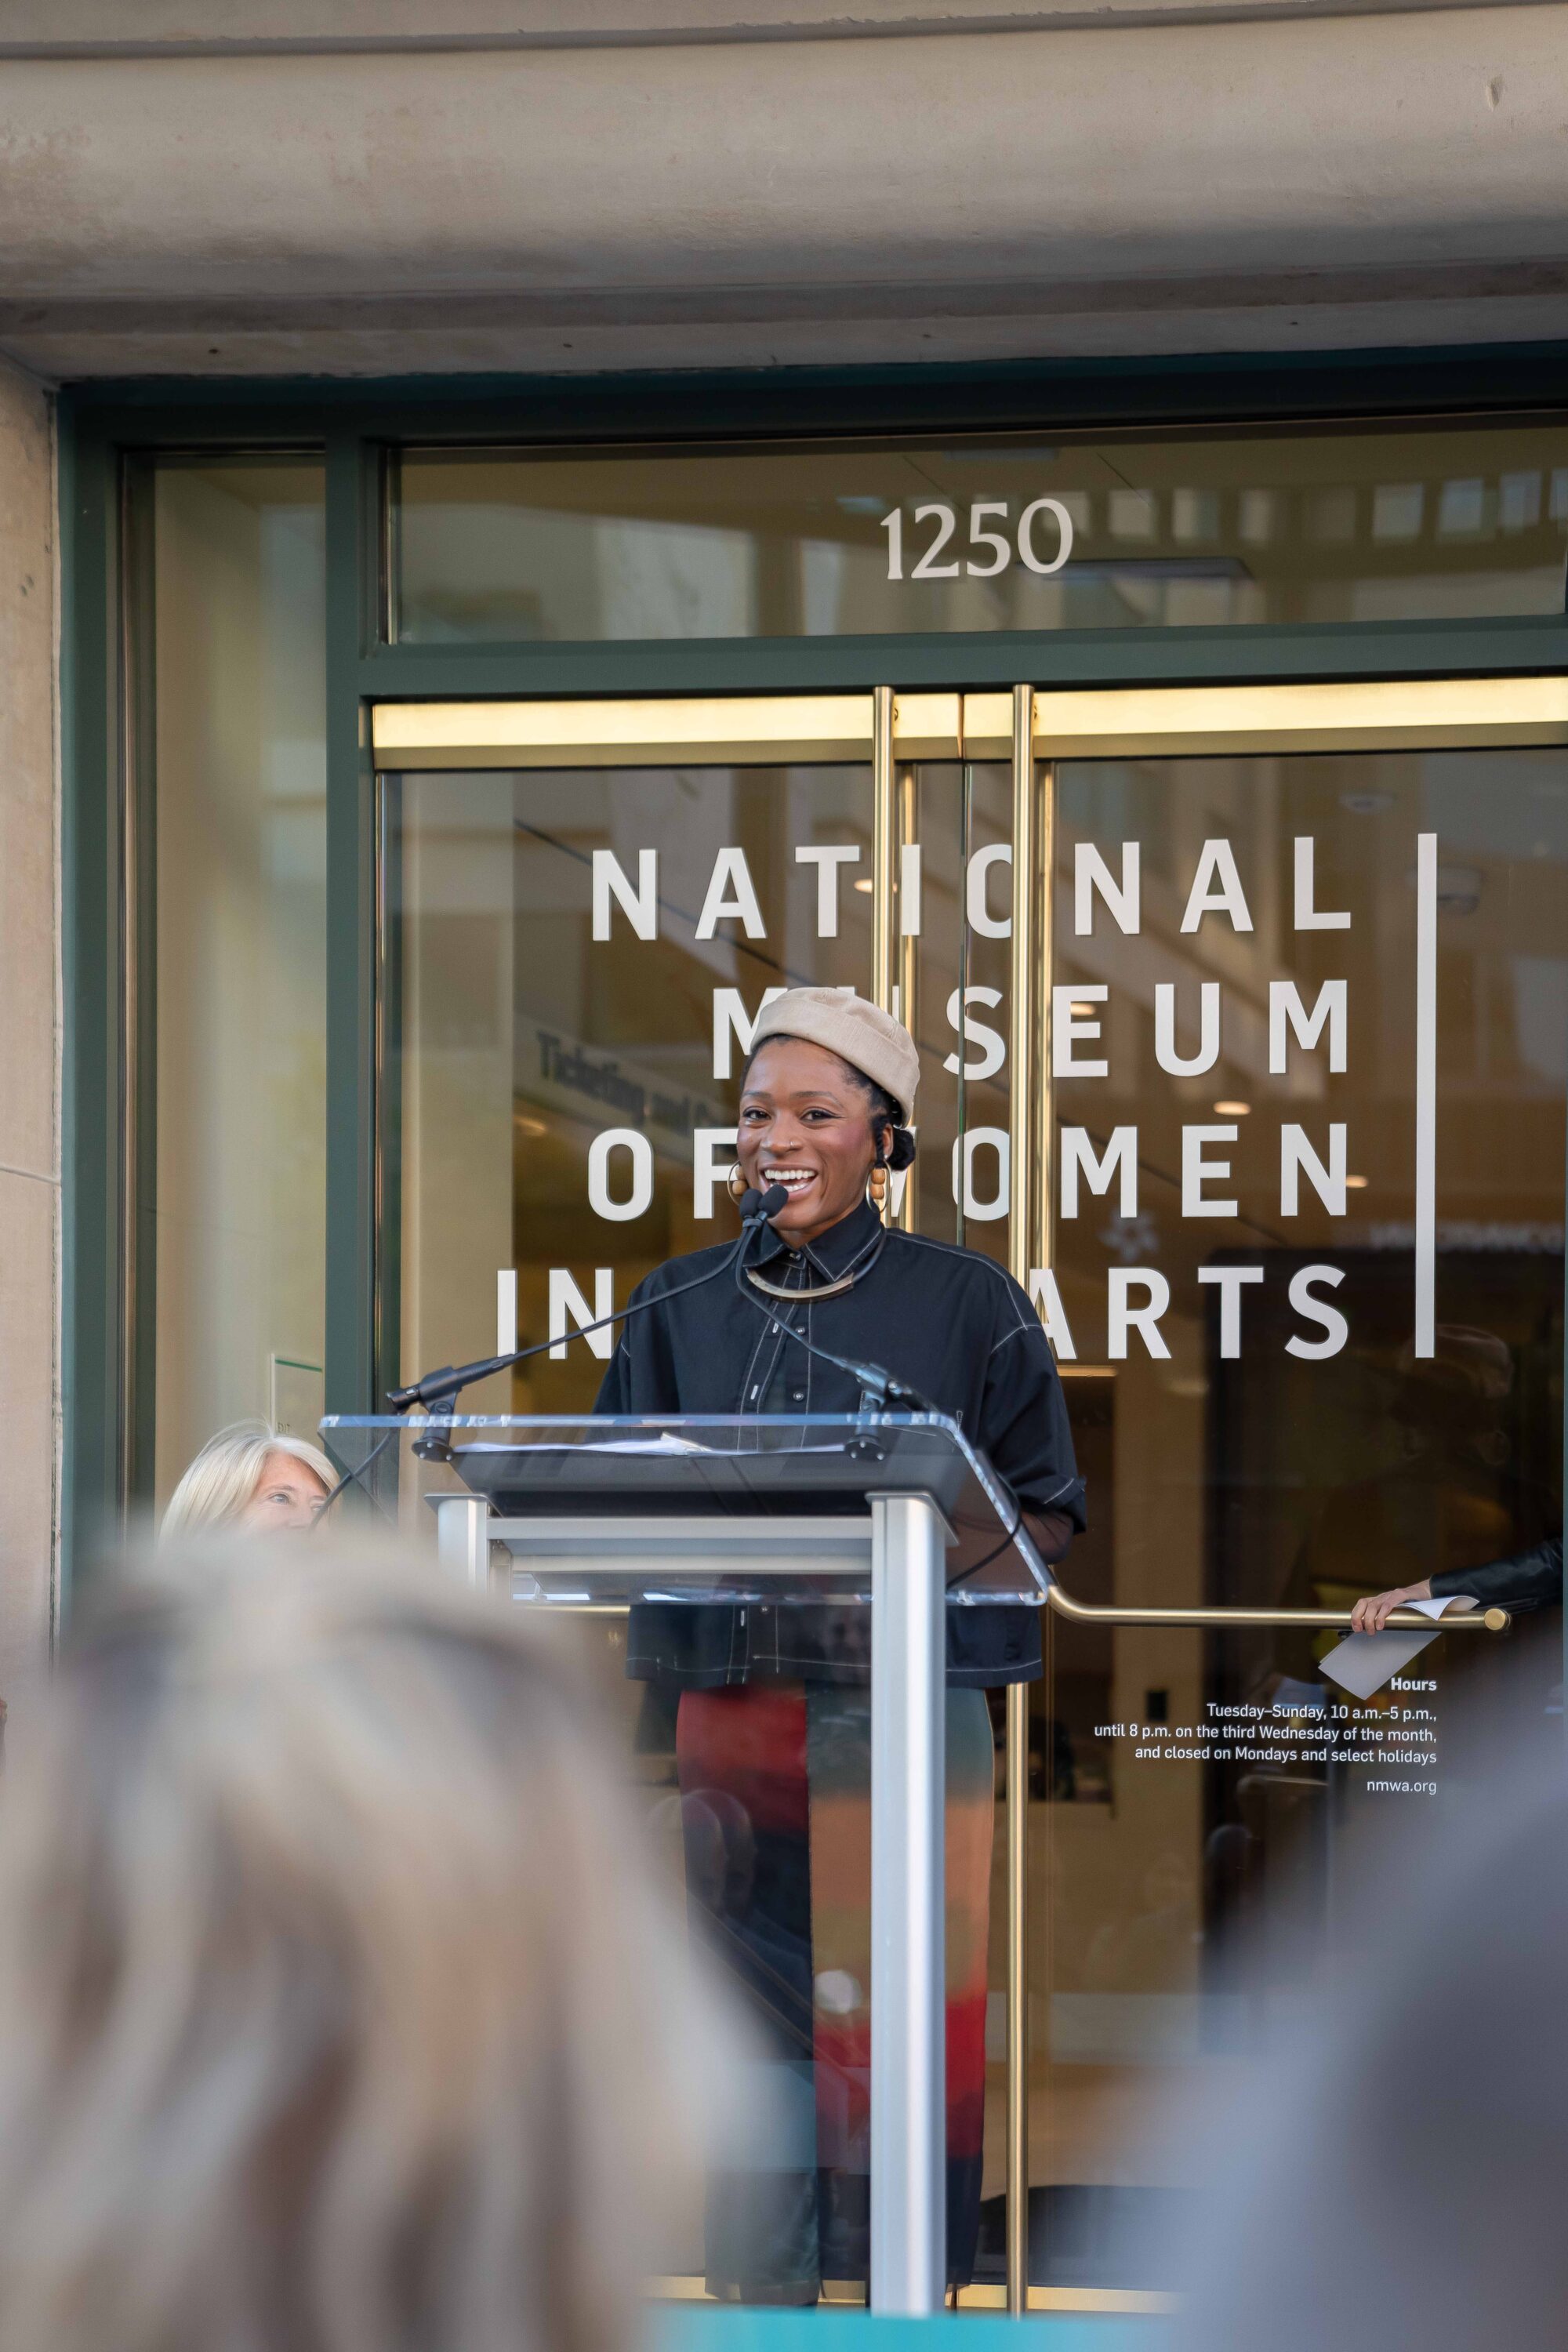 A woman with a dark skin tone wearing a beige beret is giving a speech by a lectern in front of a building. Behind her, it says "National Museum of Women in the Arts" in large, white letters on a glass door.